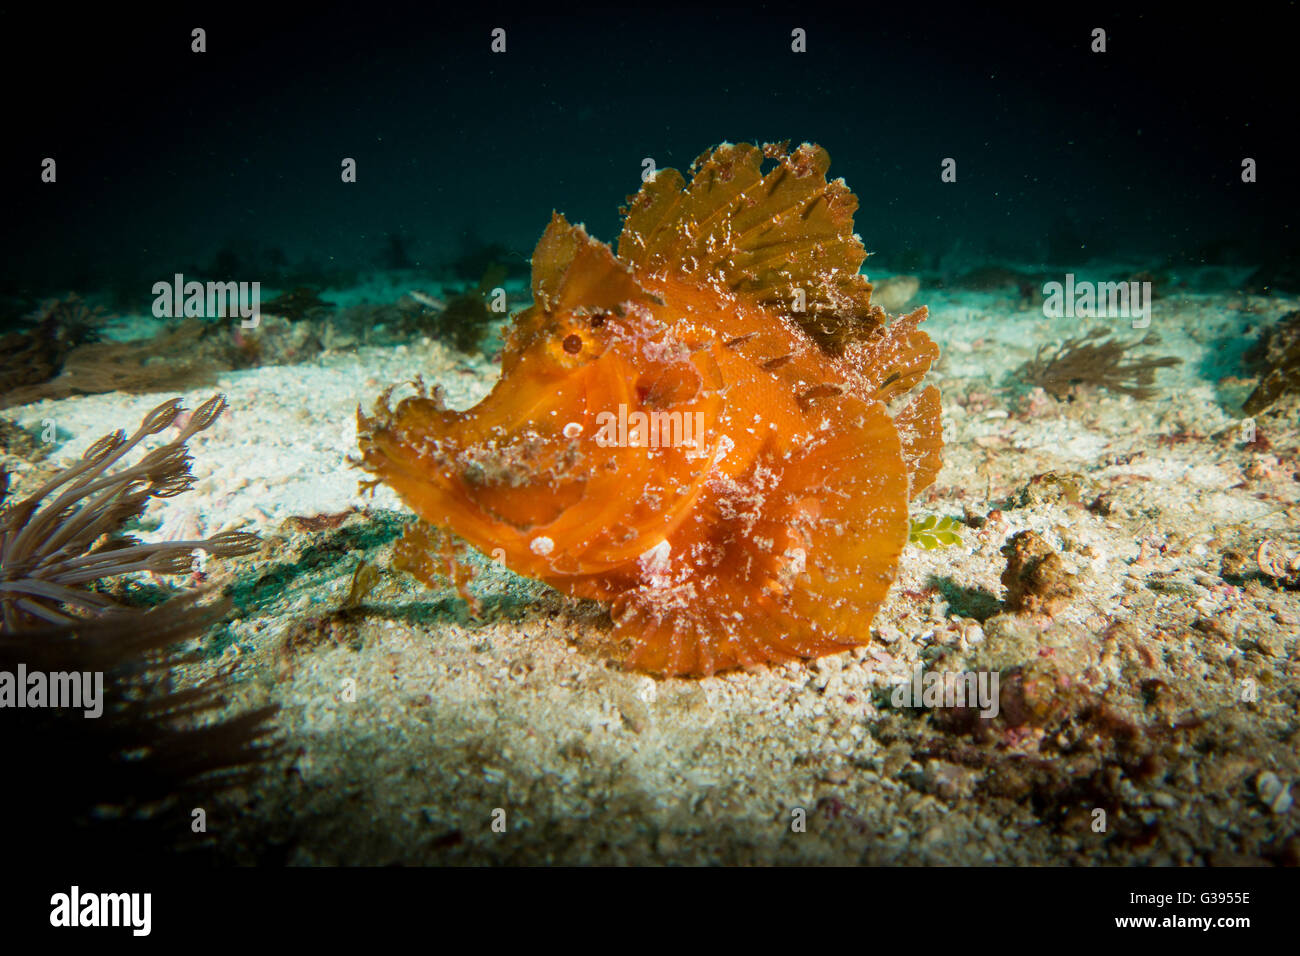 A bright orange Rhinopias frondosa or Weedy Scorpion fish sits on the sand and displays his venomous spines. Stock Photo